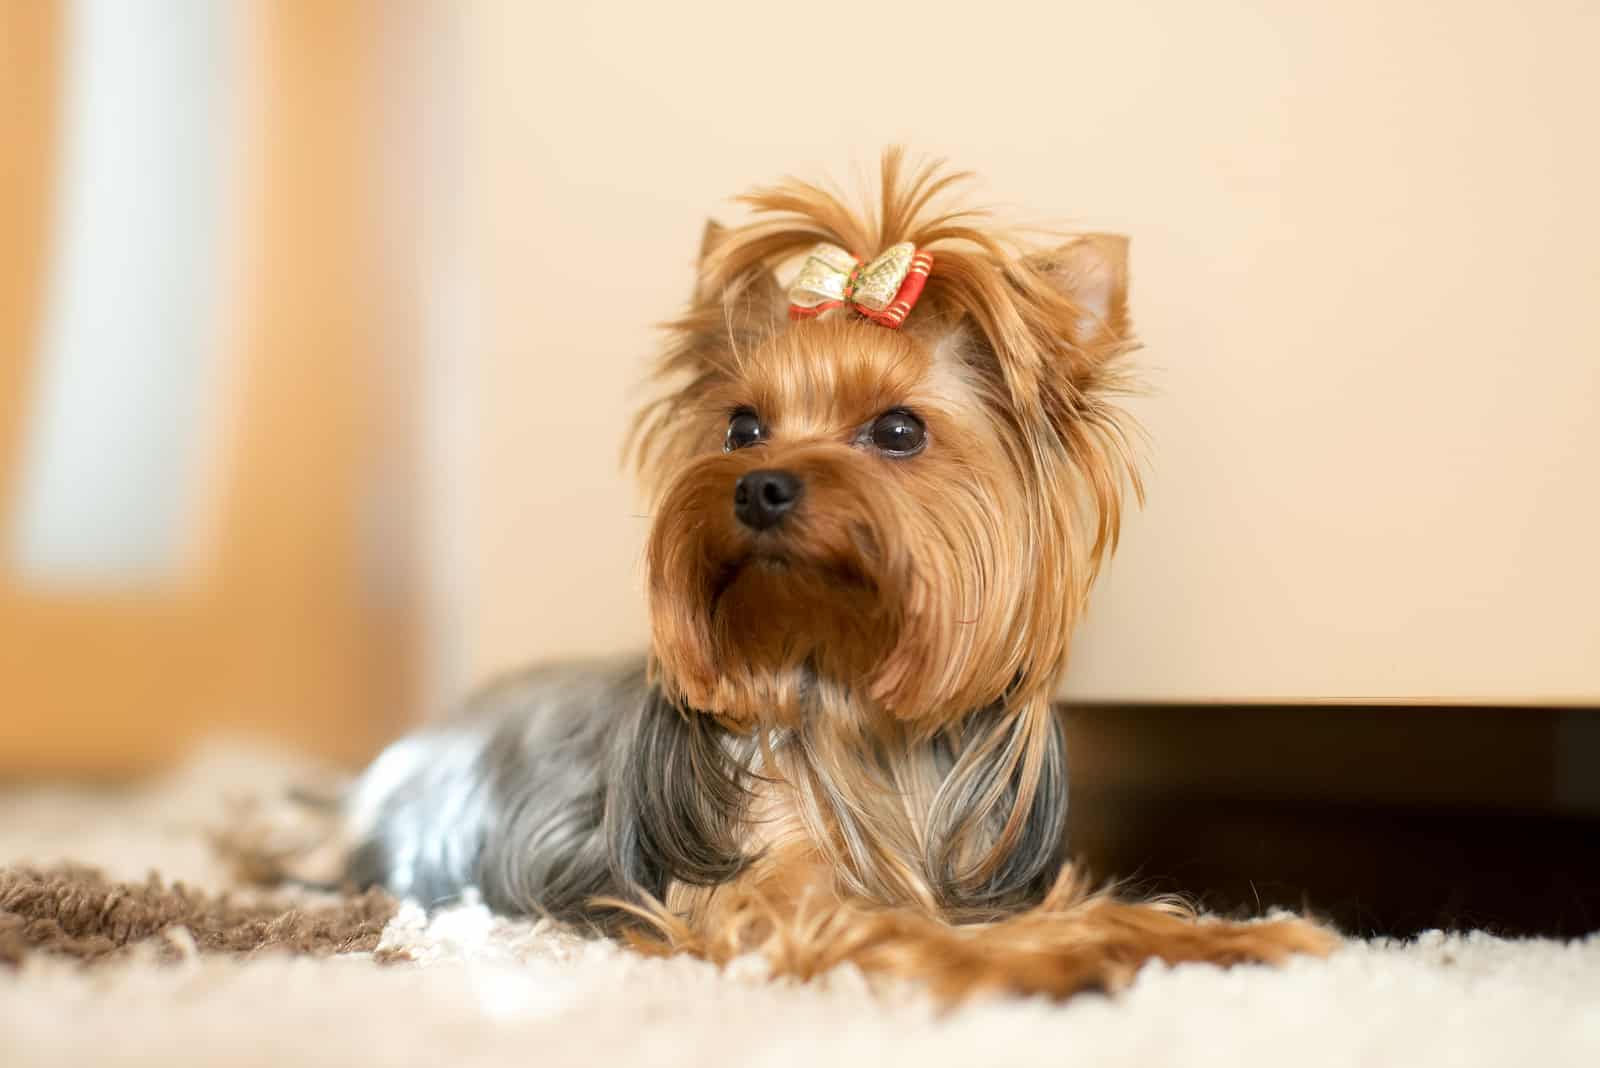 The Yorkshire terrier lies on a shaggy mat on the floor of the room